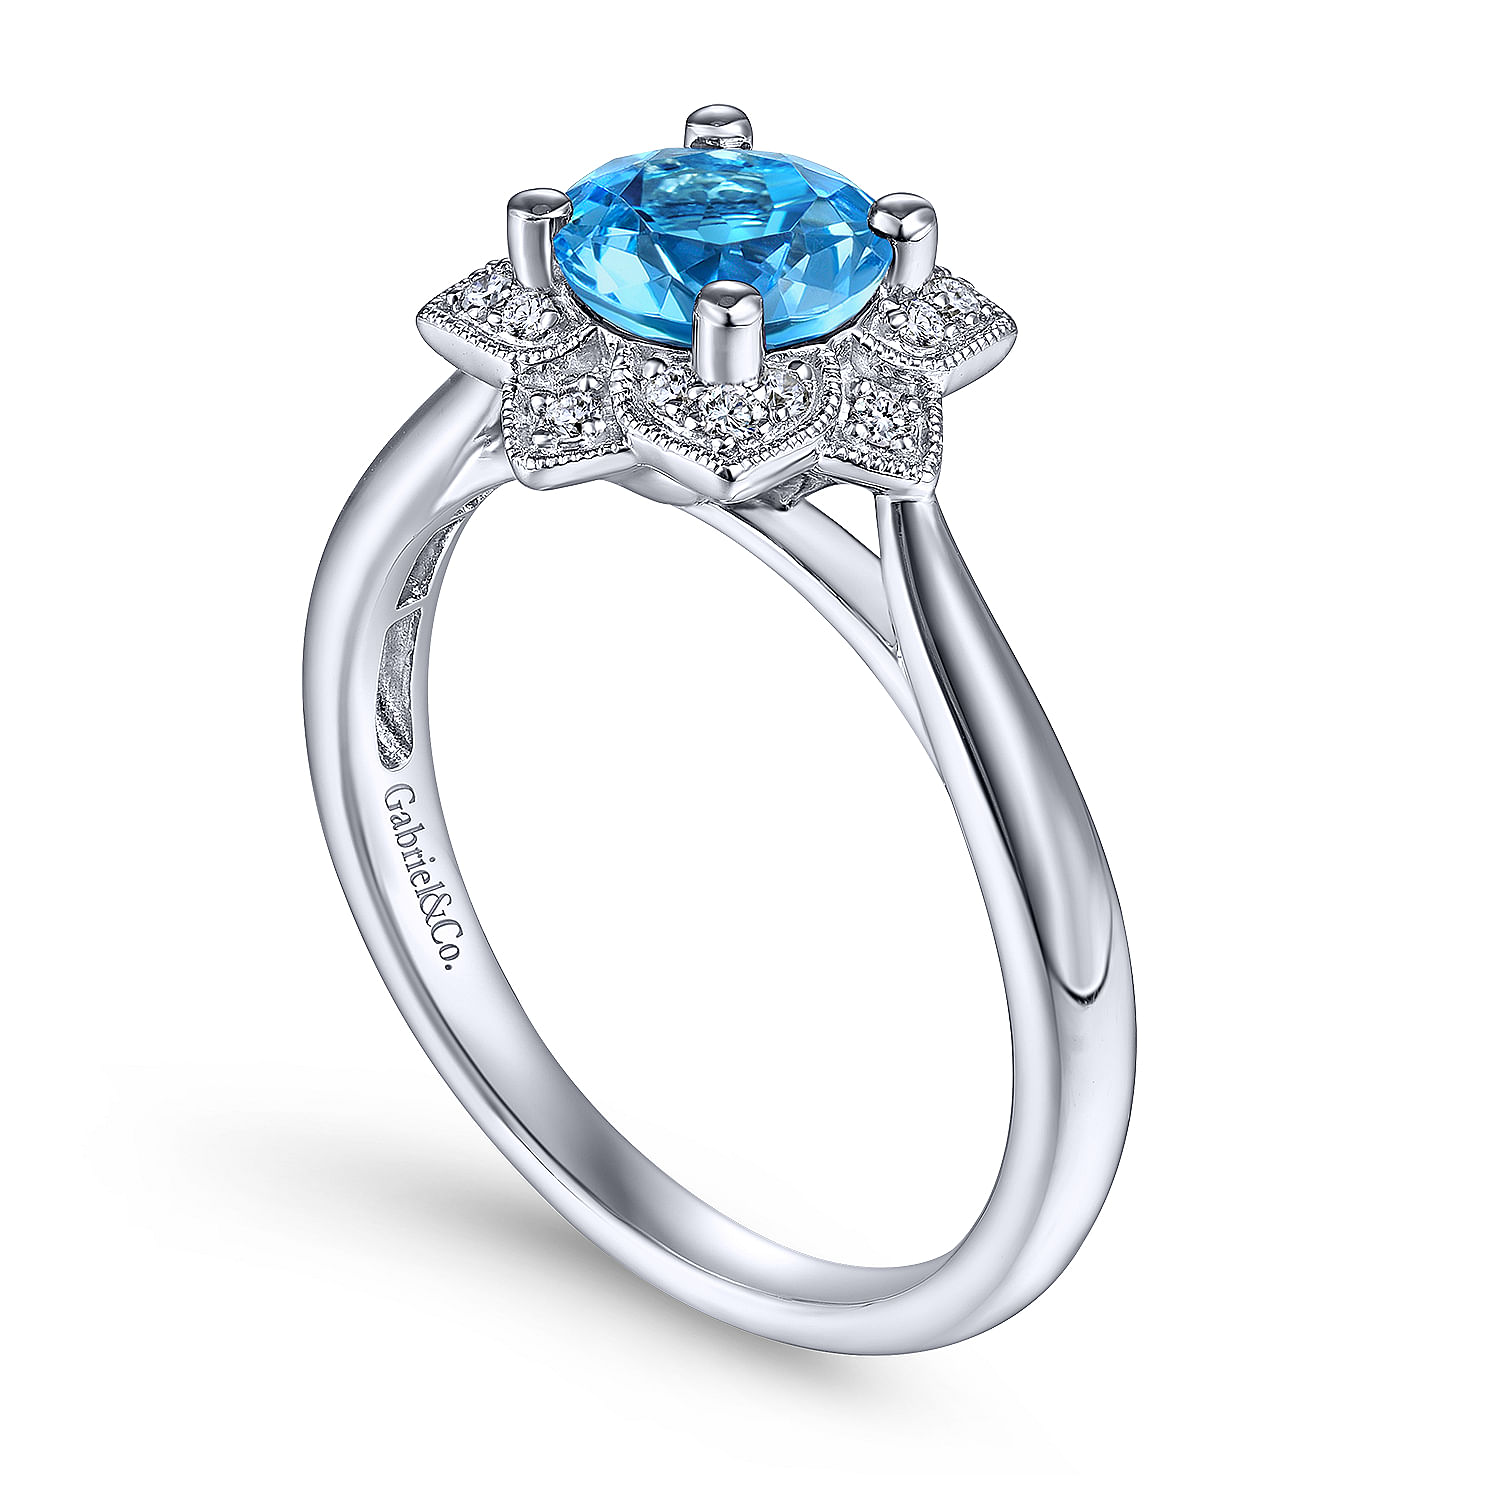 Vintage Inspired 14K White Gold Round Blue Topaz and Floral Diamond Halo Ring